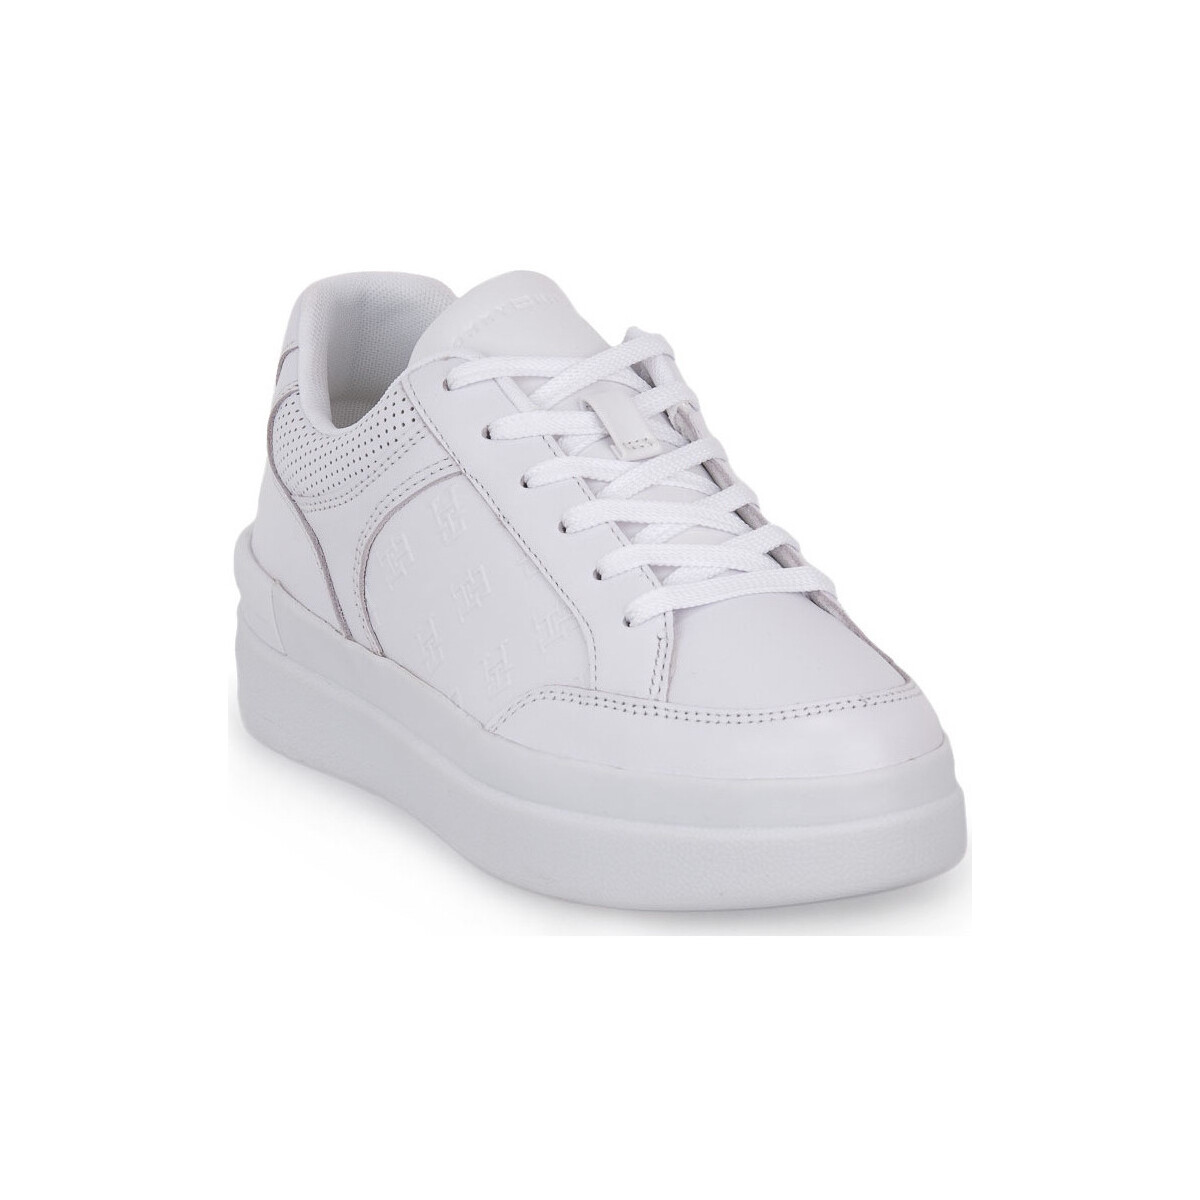 Sapatos Mulher Sapatilhas Tommy Hilfiger YBS EMBOSSED COURT Branco